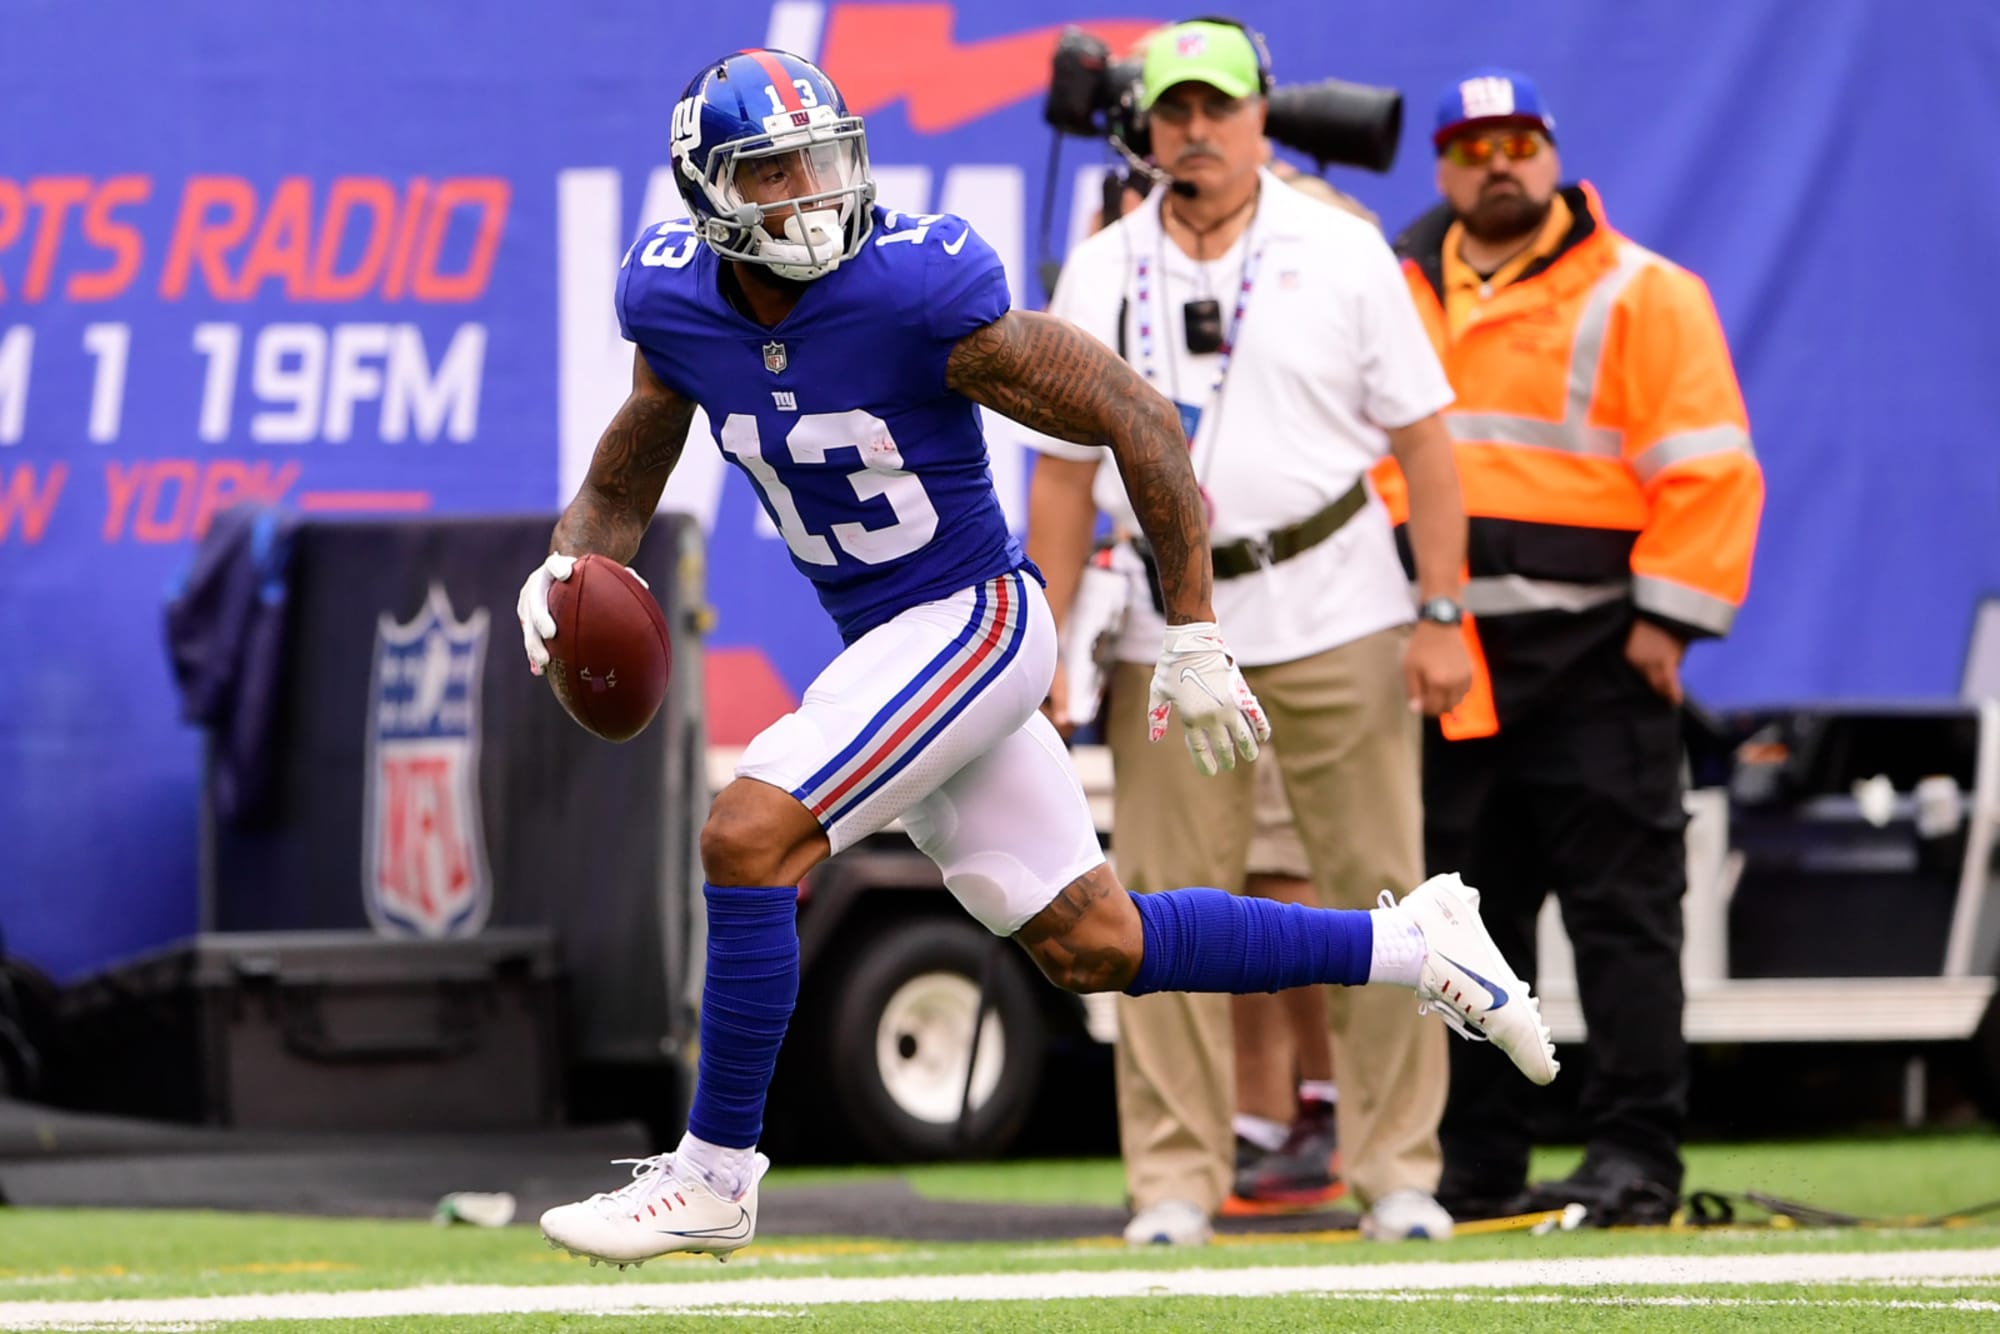 Giants owner John Mara tells Odell Beckham to play more and talk